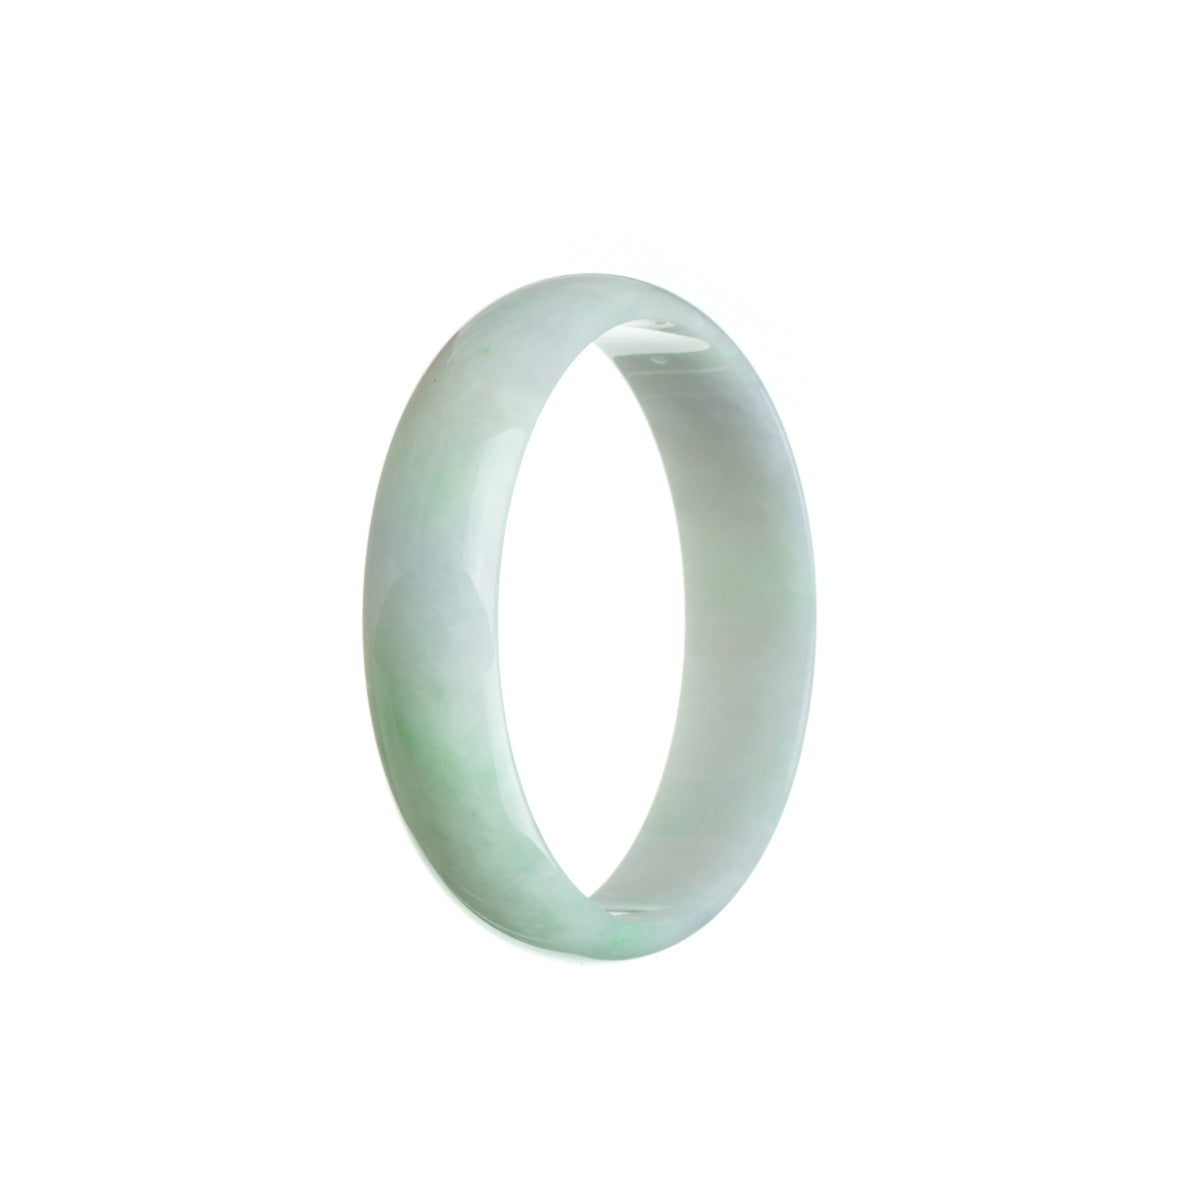 A close-up image of a stunning jade bangle bracelet in a vibrant shade of green with hints of lavender and white. The bracelet has a flat shape and a diameter of 52mm, exuding an authentic and high-quality appearance. Designed by MAYS.